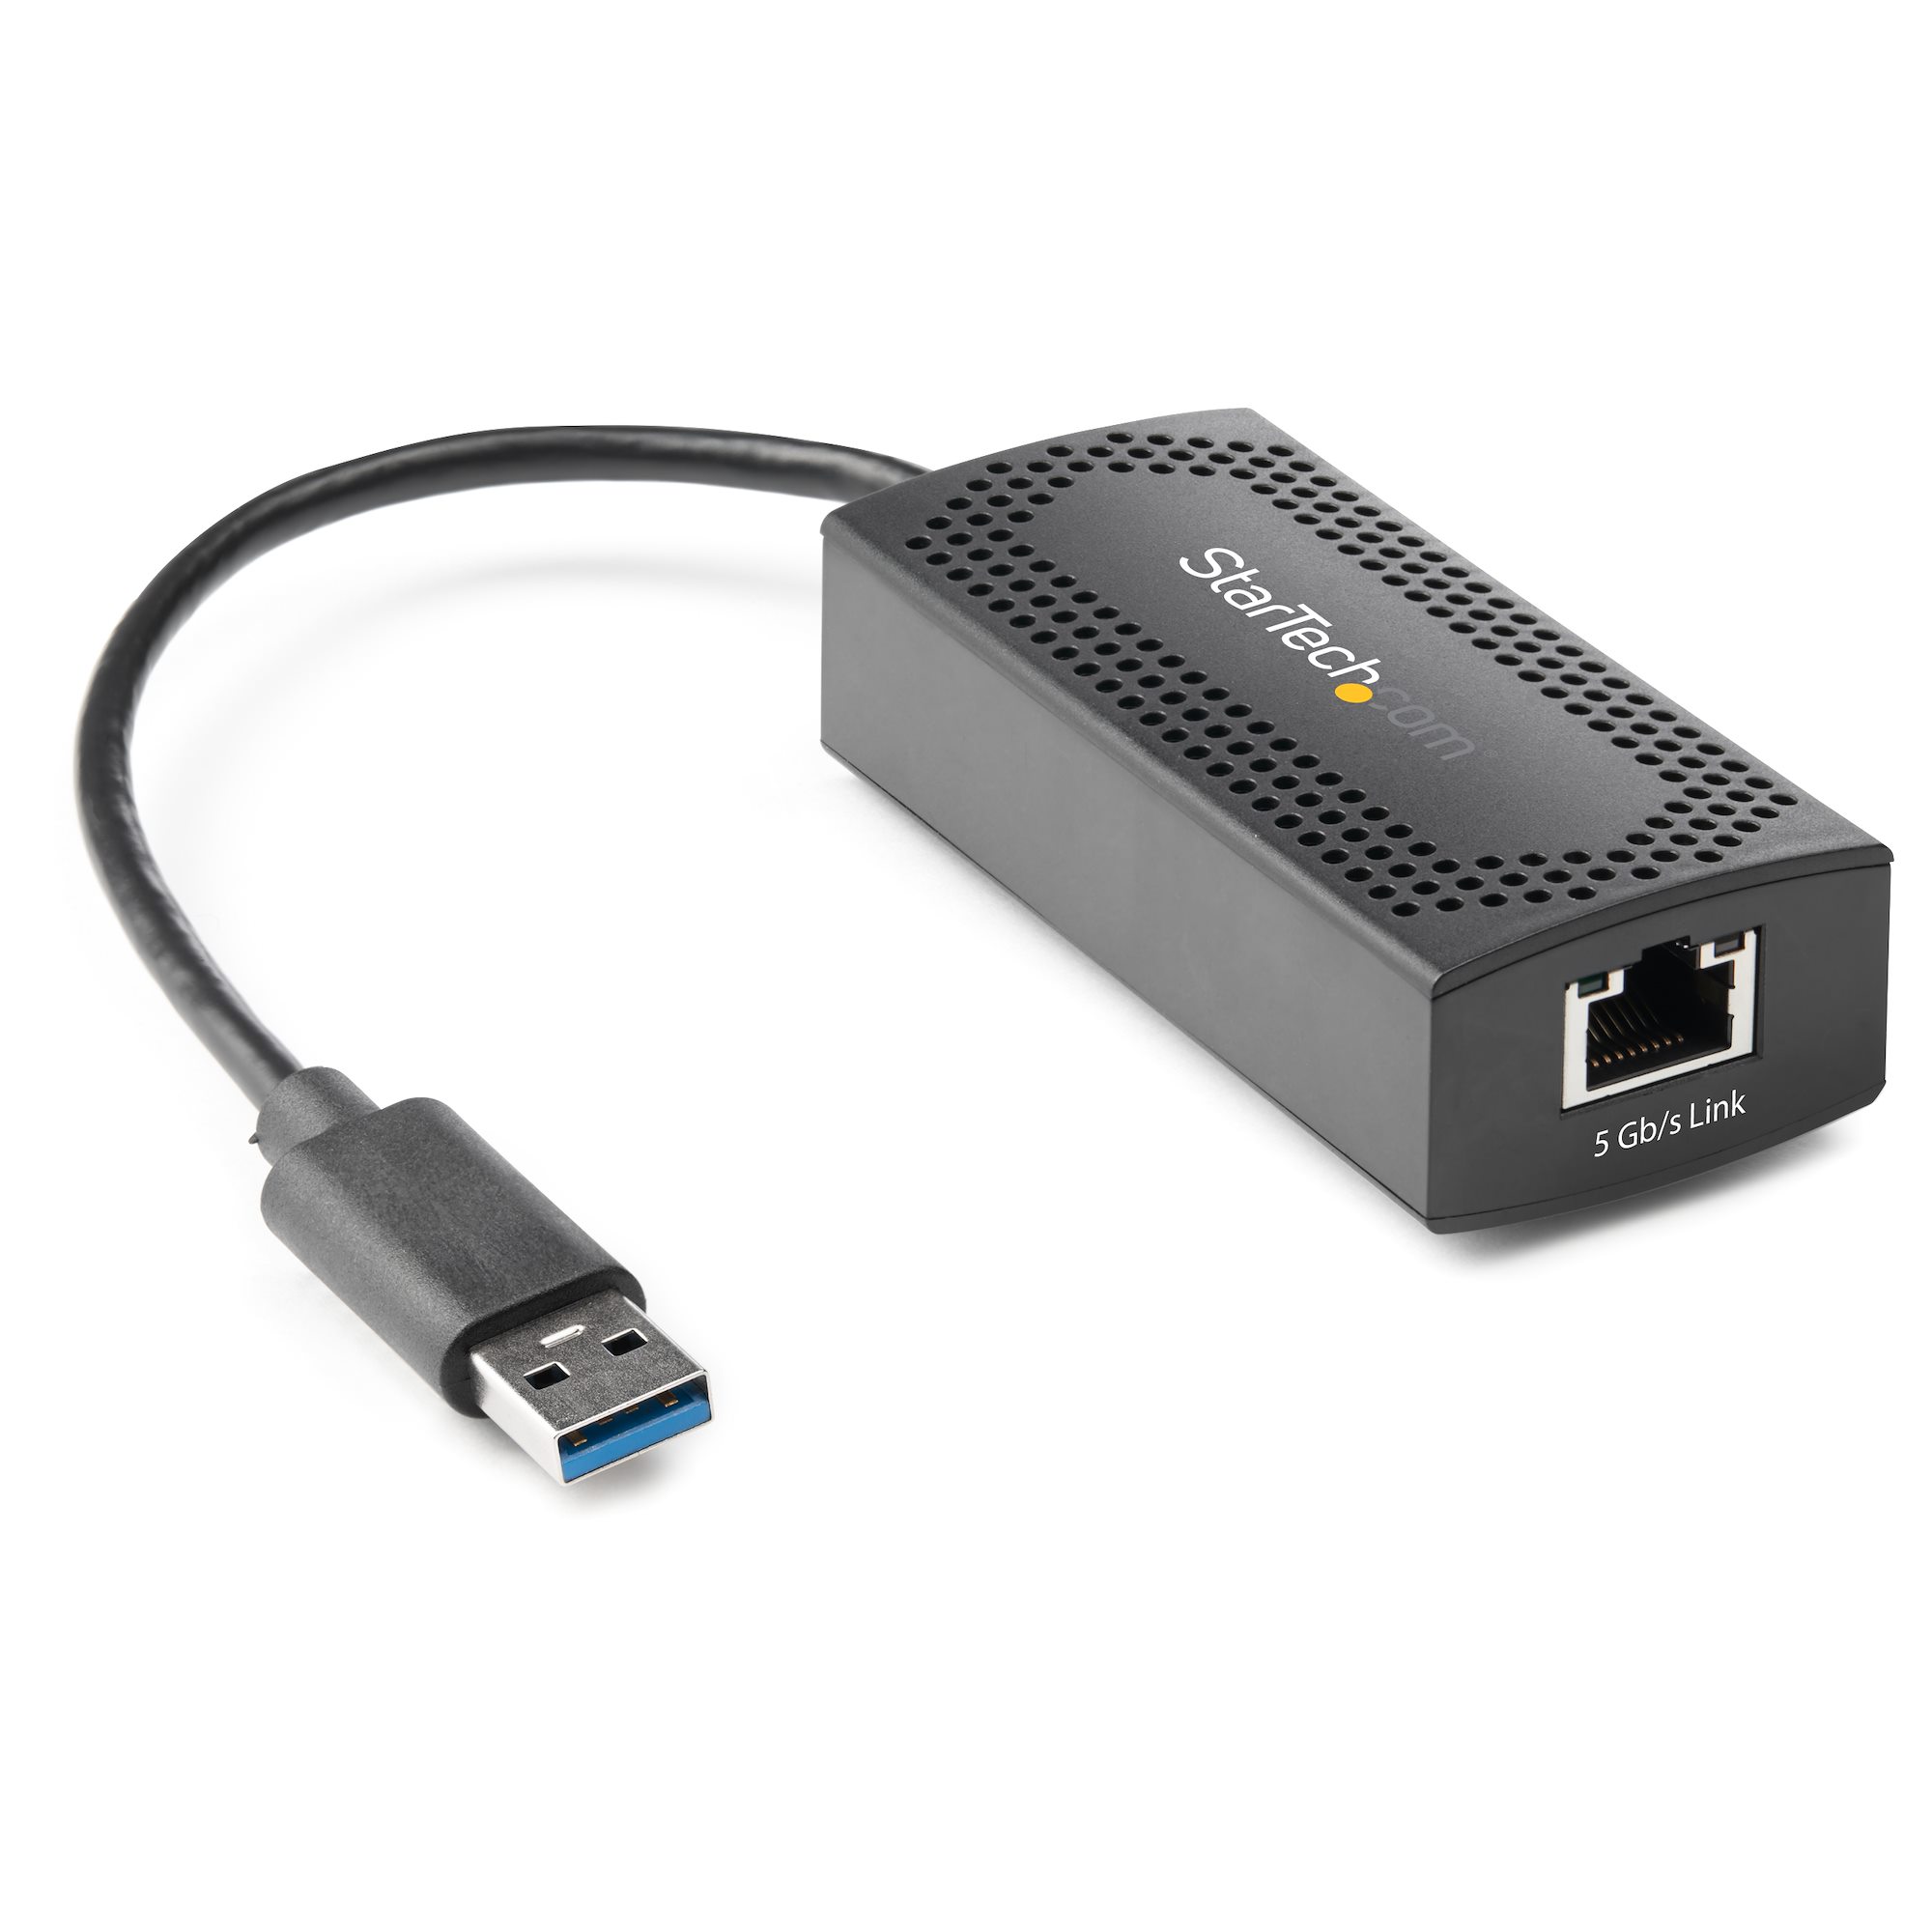 Låse Snavs Plys dukke 5GbE USB A Ethernet Adapter NBASE-T NIC - USB and Thunderbolt Network  Adapters | Networking IO Products | StarTech.com